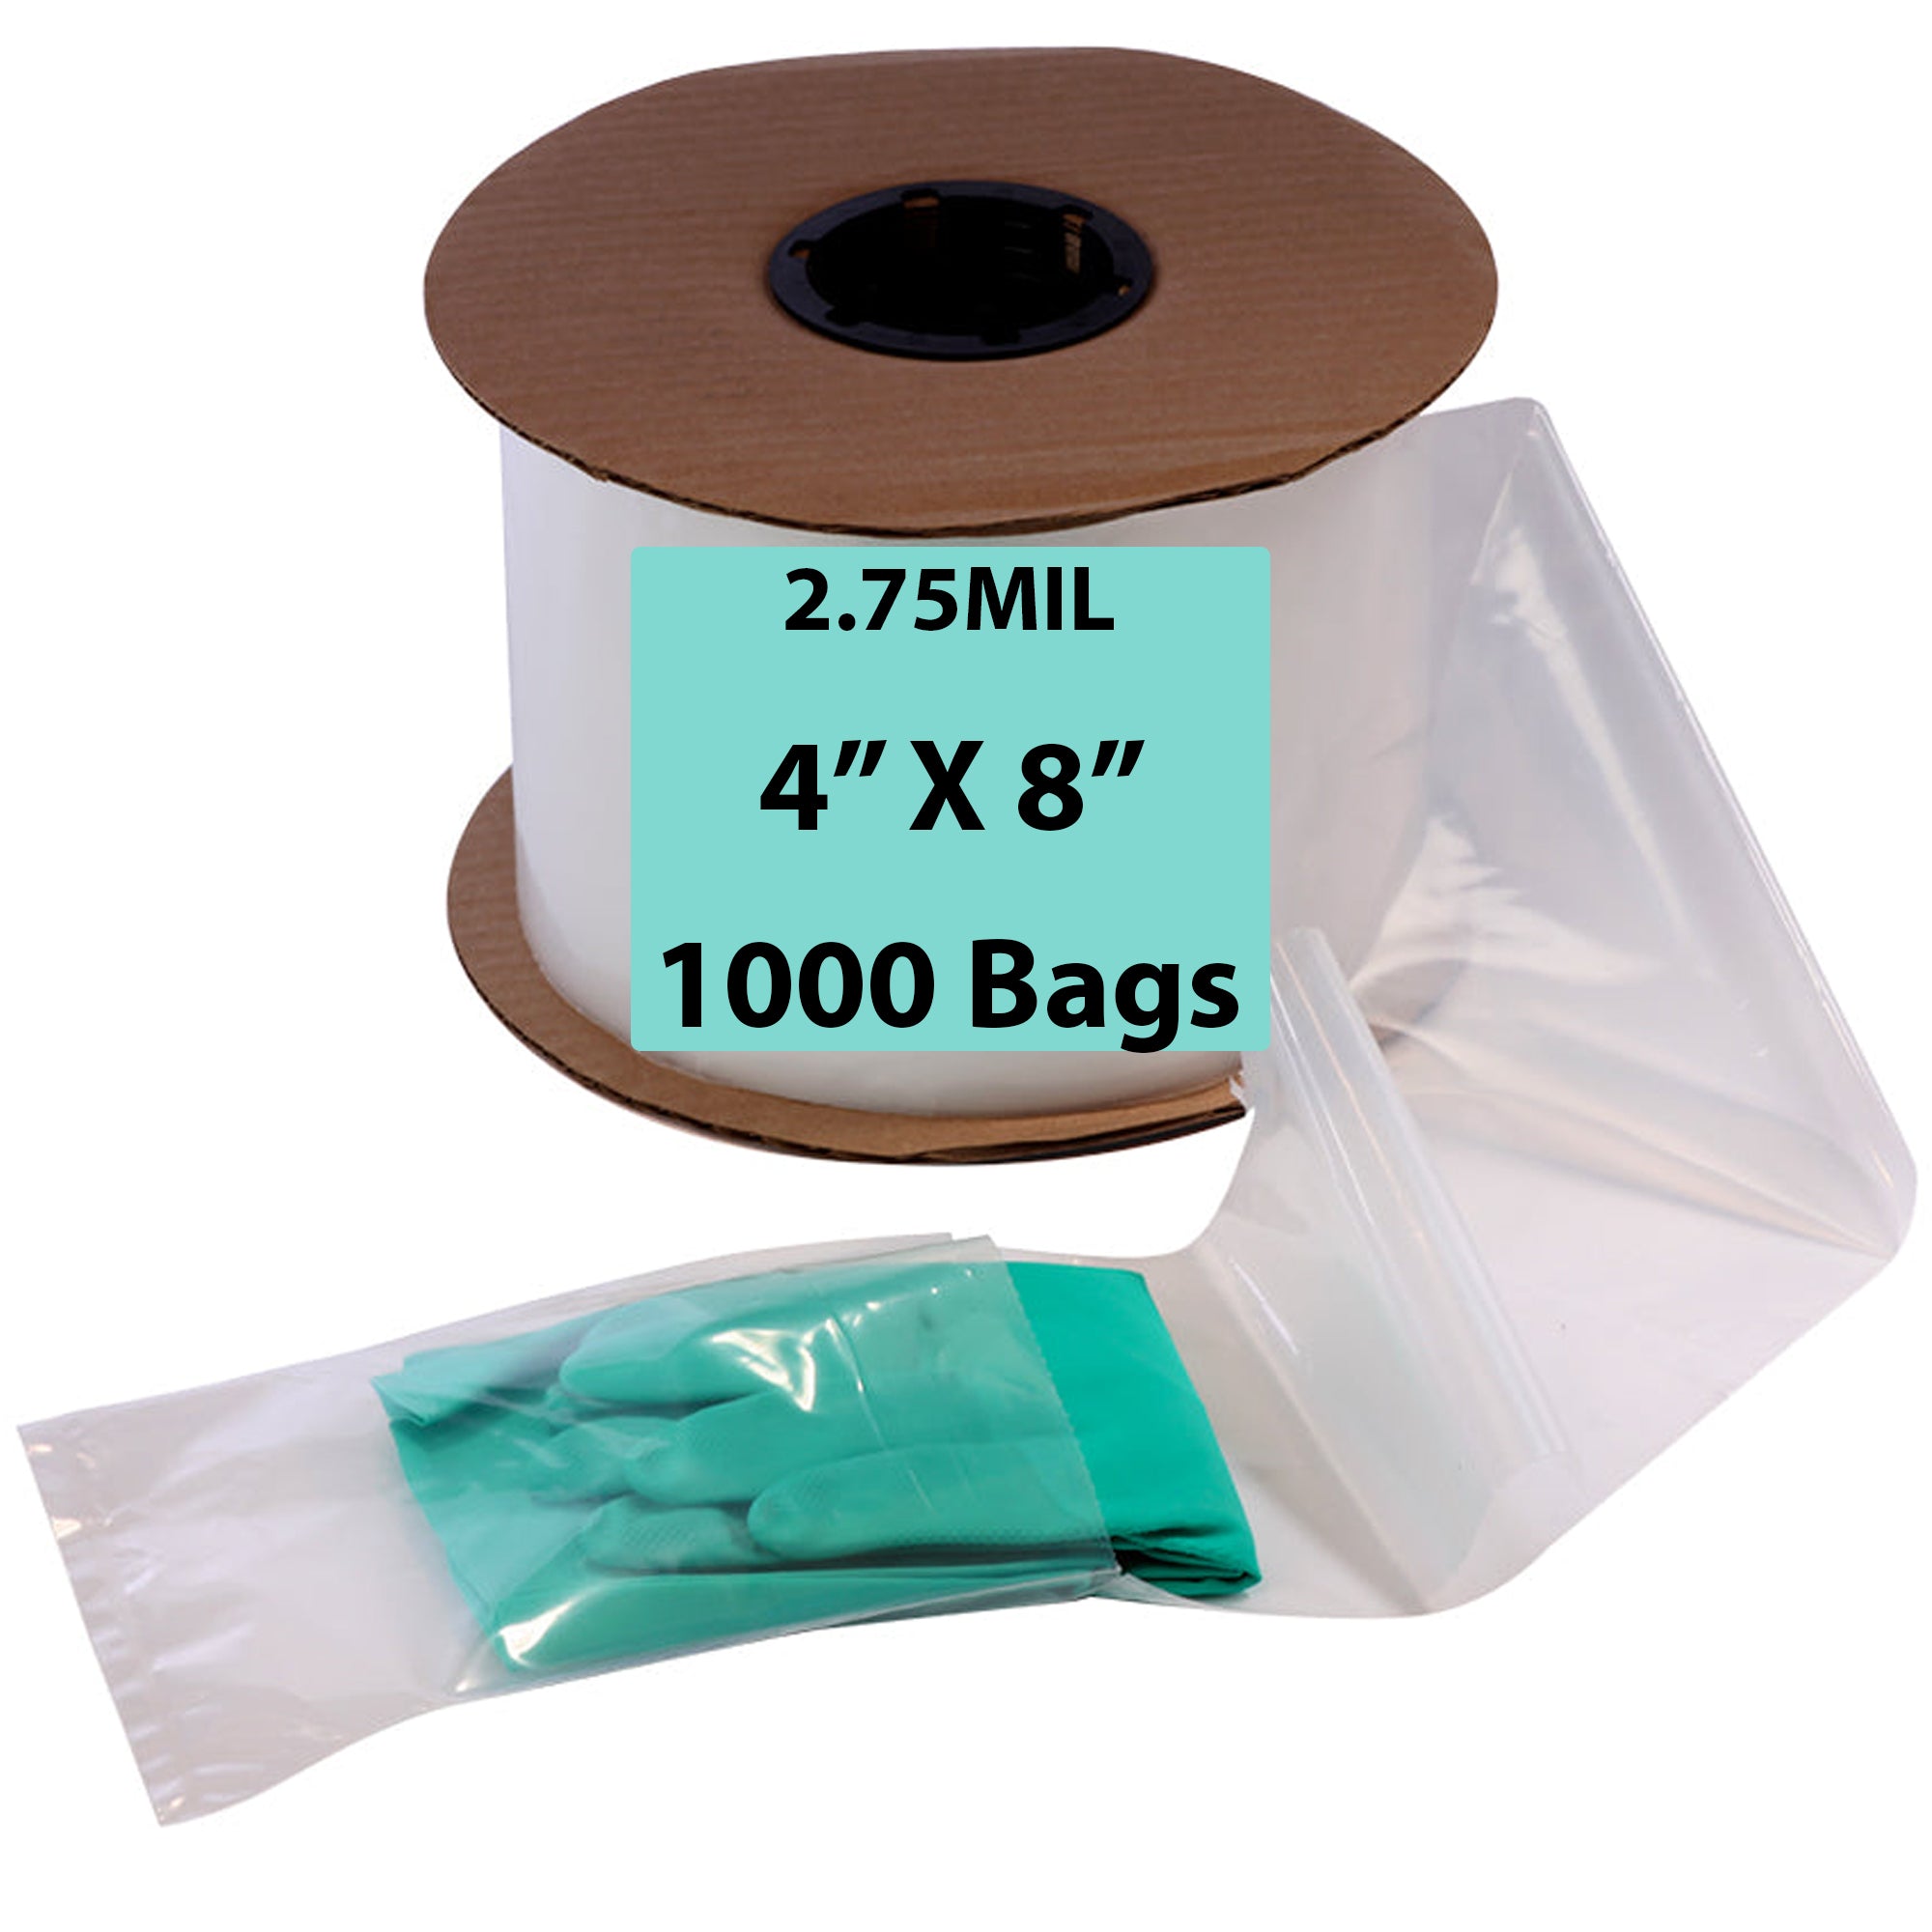 Autobag Heavy Perforated Roll Auto Fill Poly Bags- 4"x8", 2.75 Mil - 1000 Bags